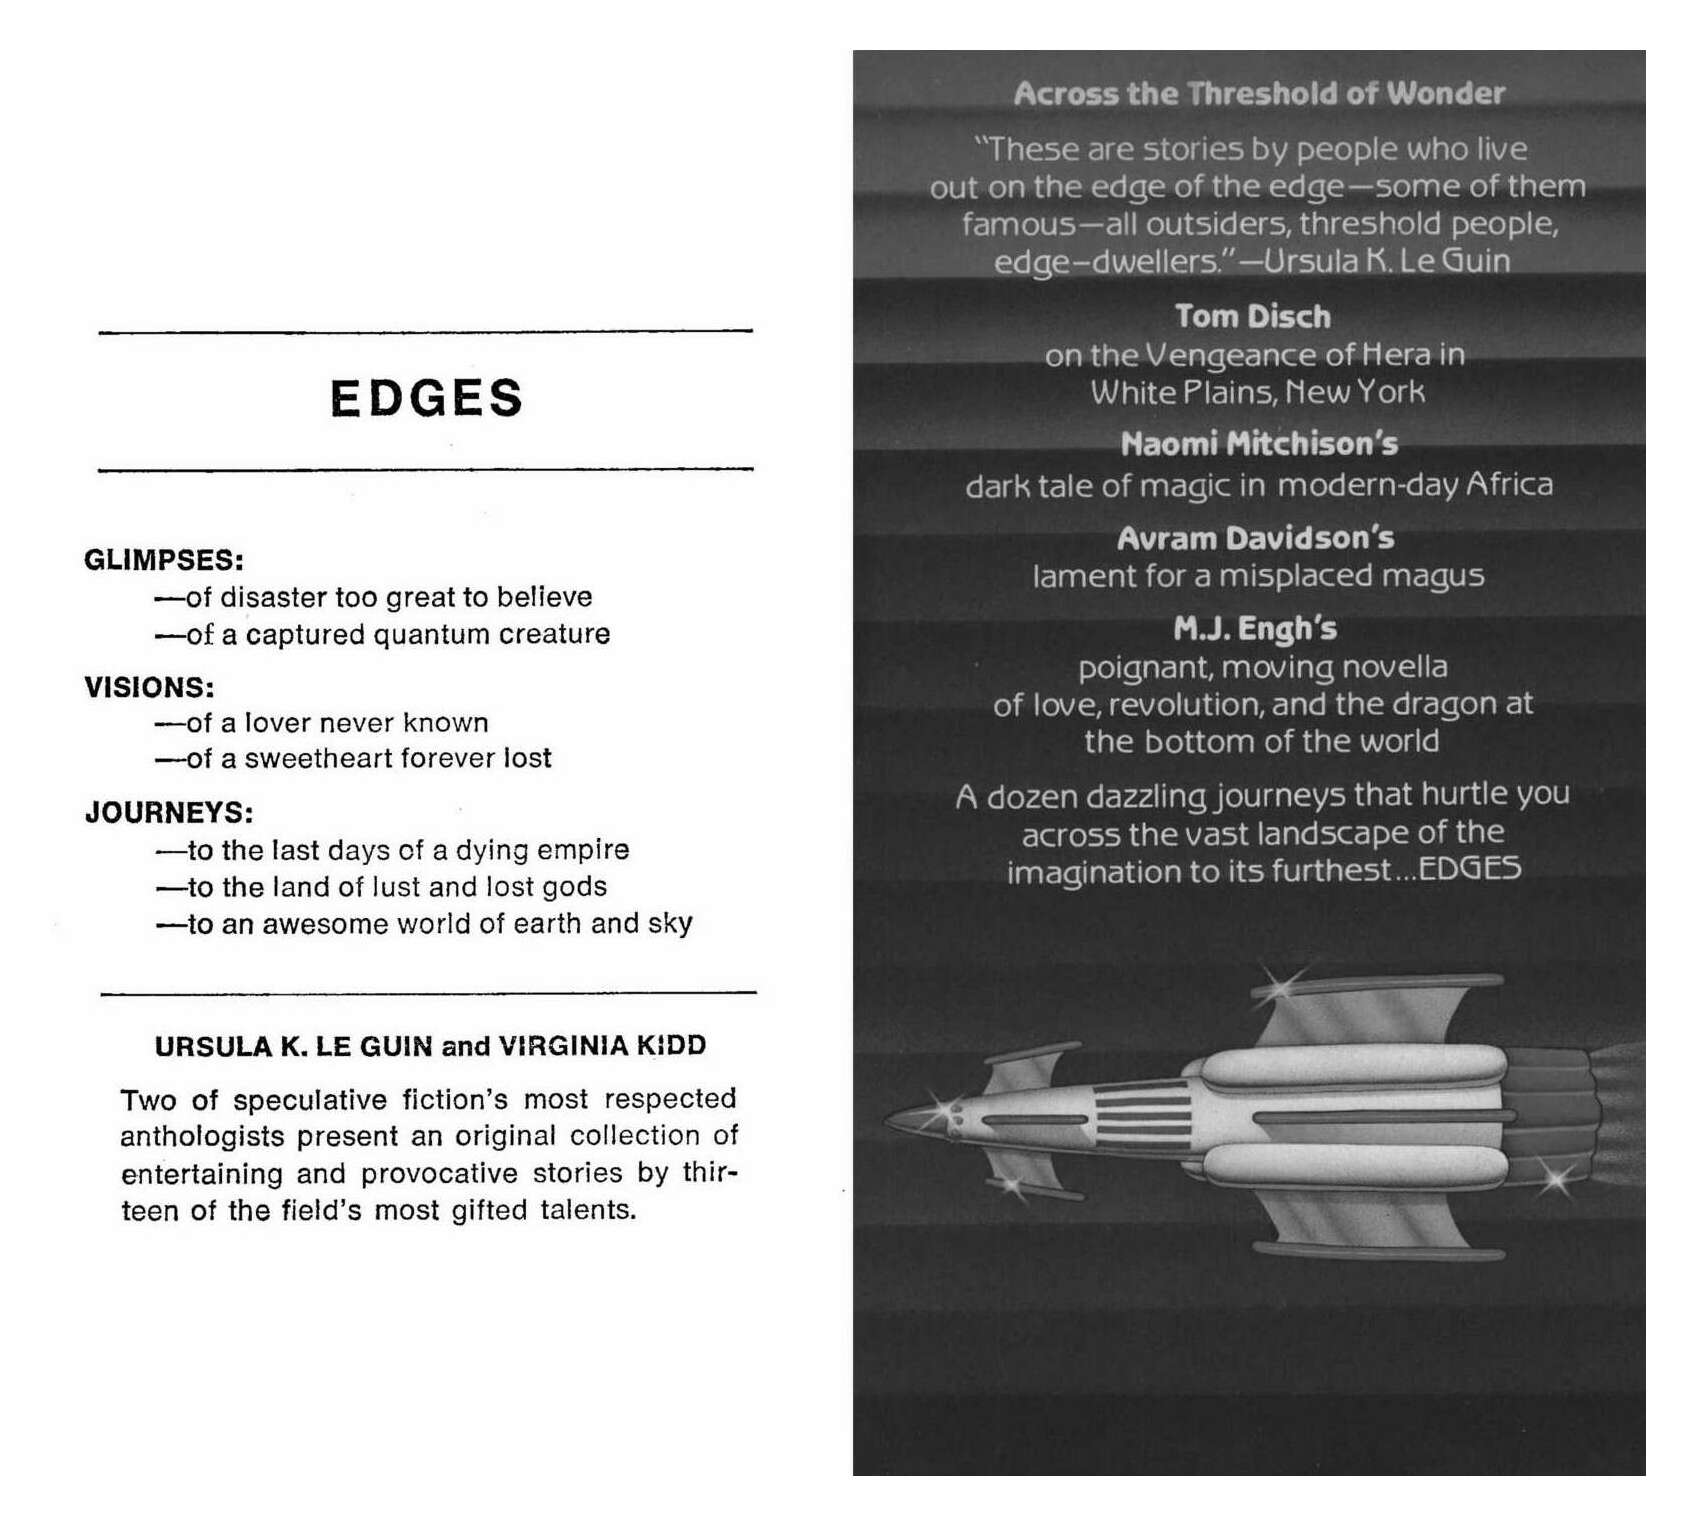 The front & back book cover pages of Edges which opaquely describe each of the 13 stories (identified below).